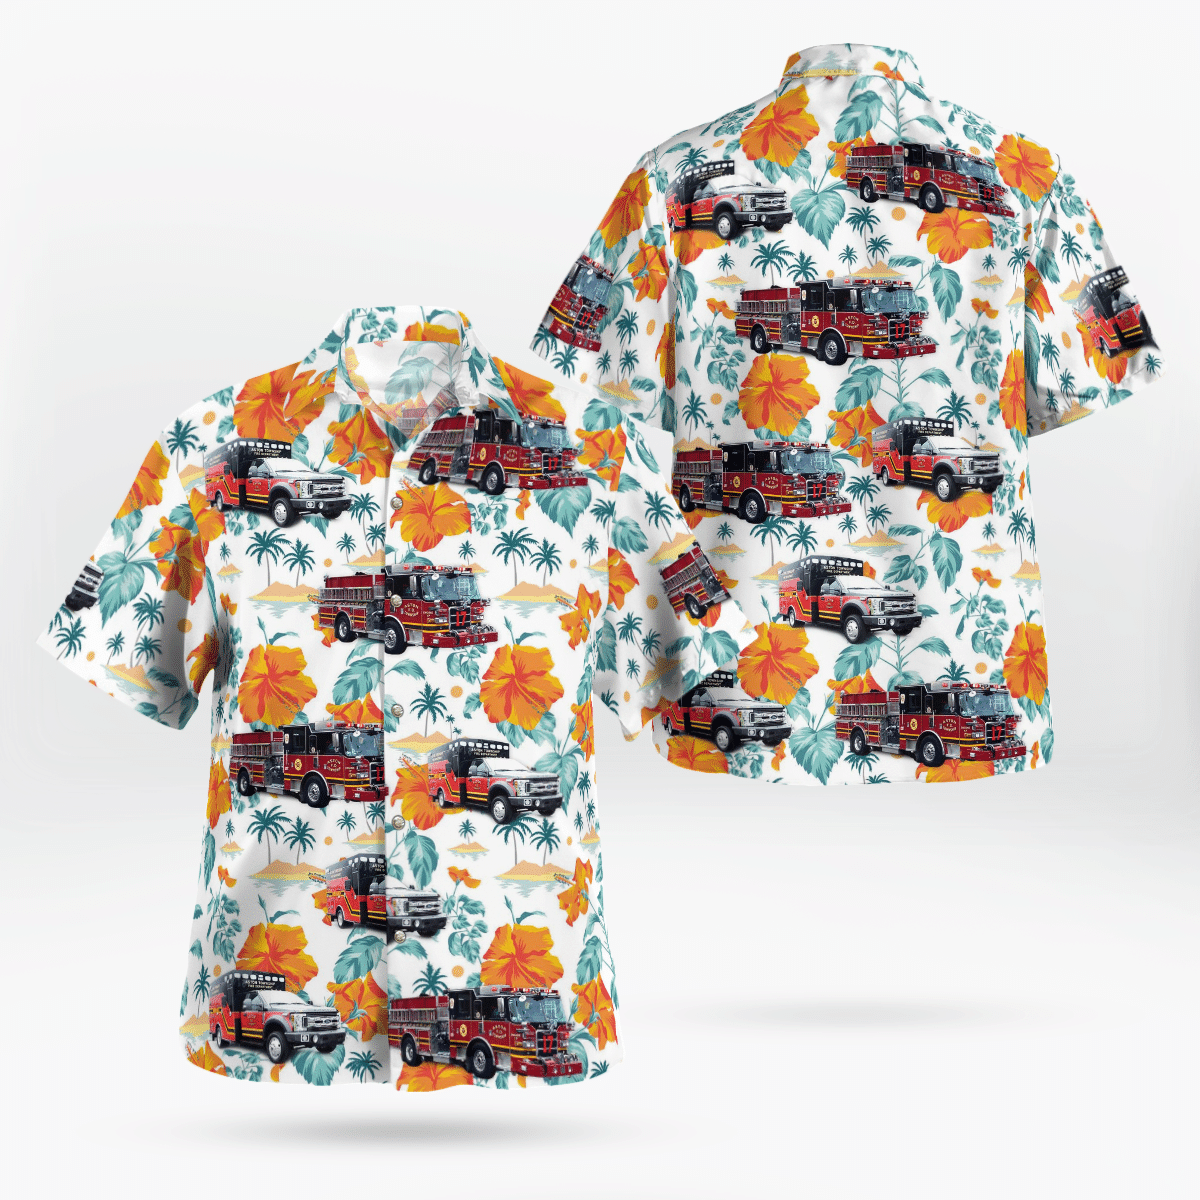 If you are in need of a new summertime look, pick up this Hawaiian shirt 96